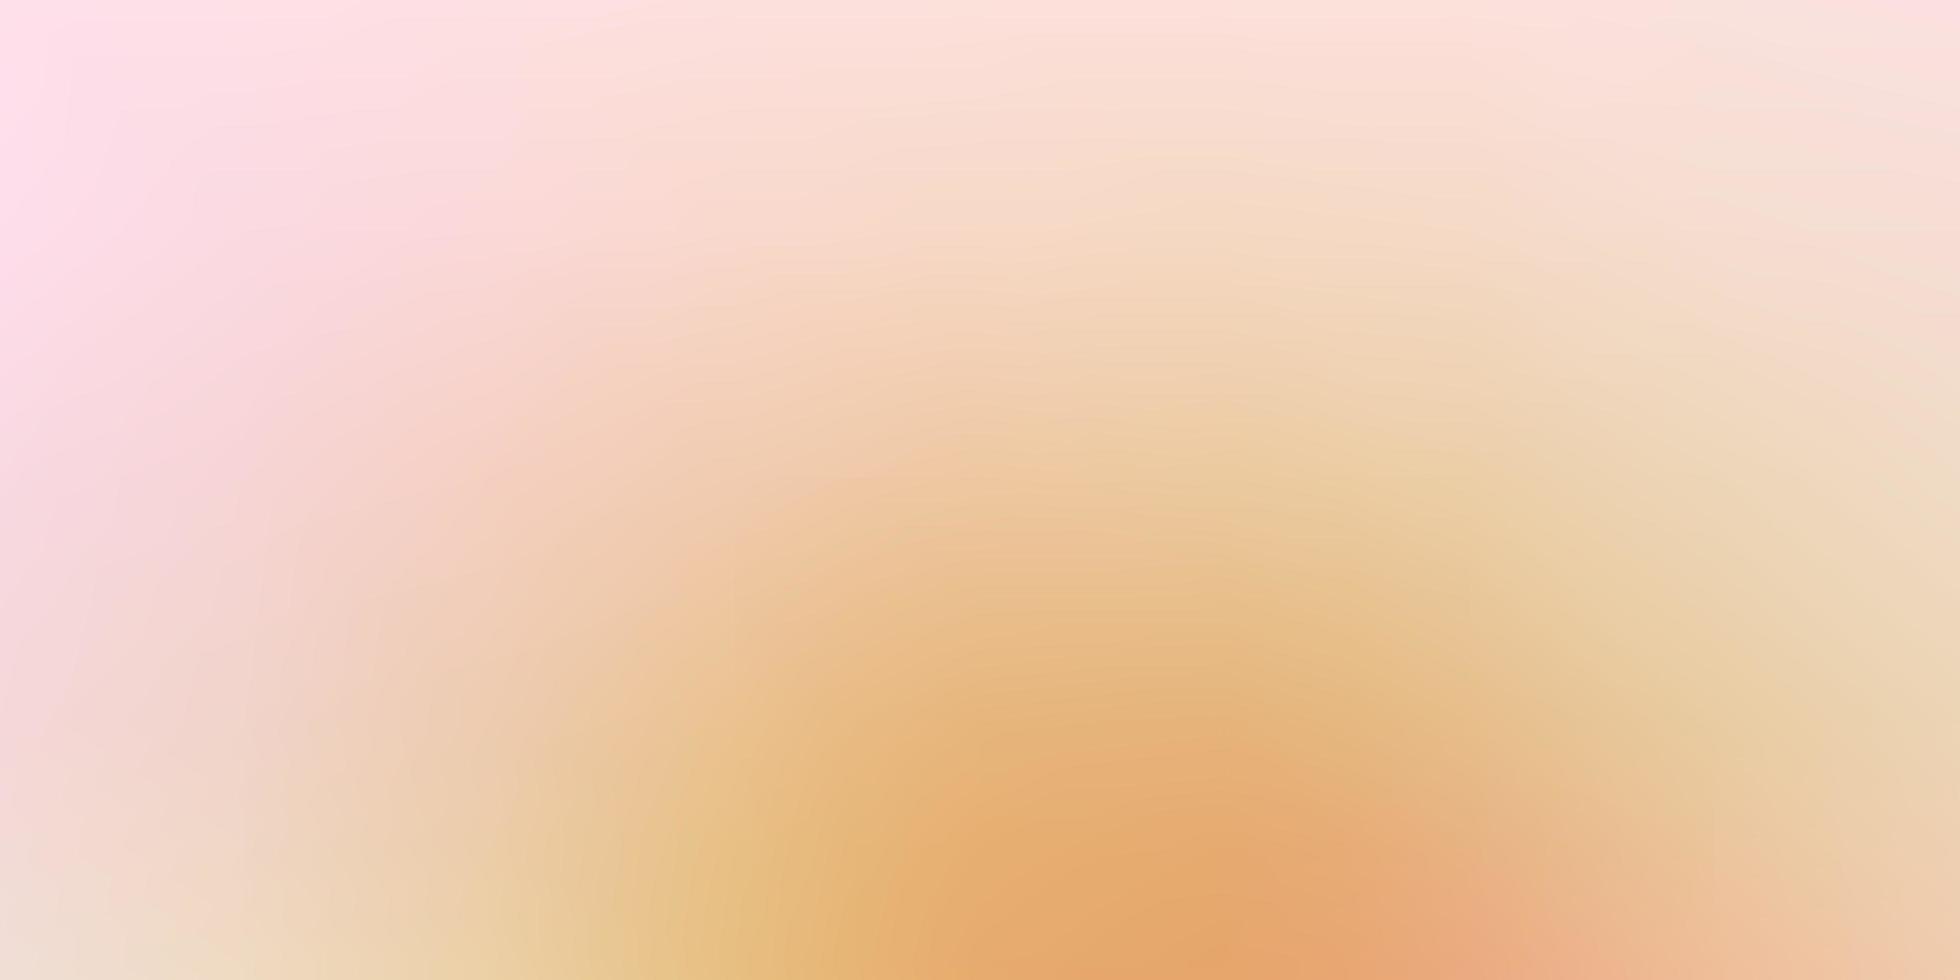 Light Pink Green vector blurred background Abstract colorful illustration with gradient Base for your app design